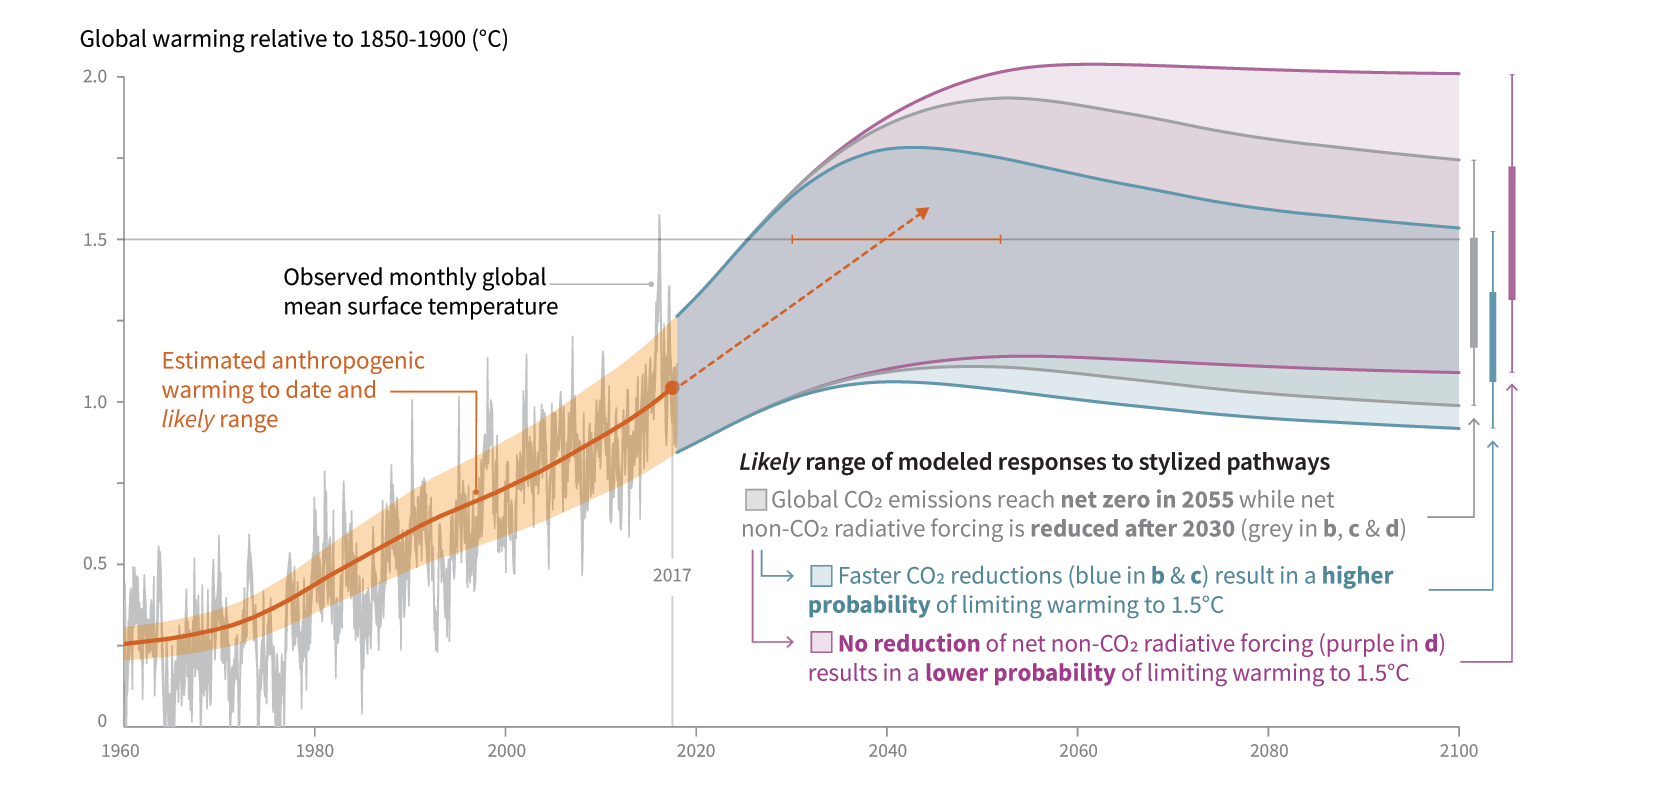 Paths towards Paris agreement's goal <br>Source: IPCC 2019 special report on Global warming of 1.5°C